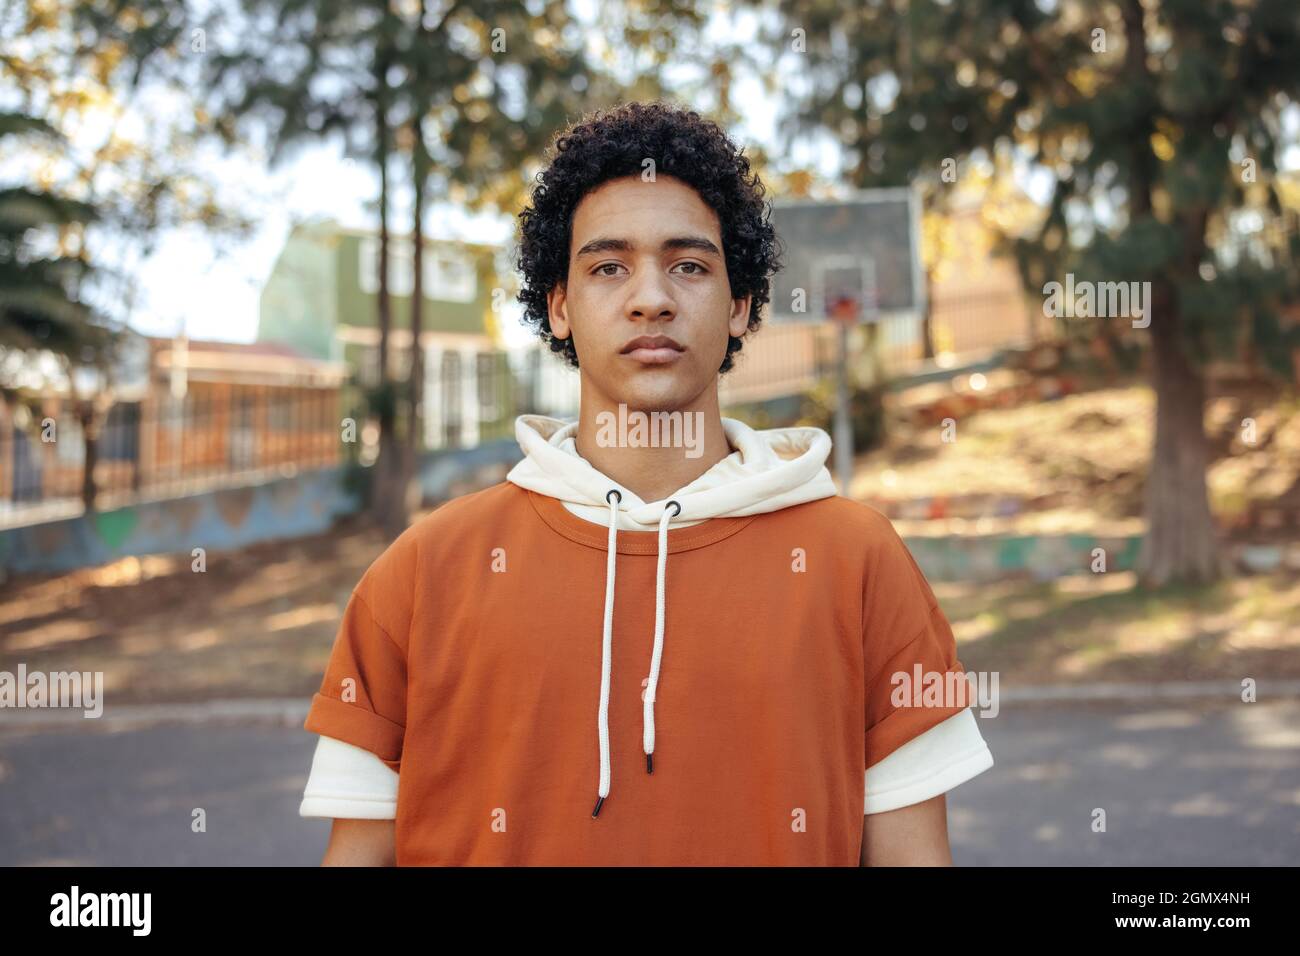 Confident male youngster looking at the camera outdoors. Teenage boy wearing casual clothing in an urban park. Self-confident young teenager standing Stock Photo